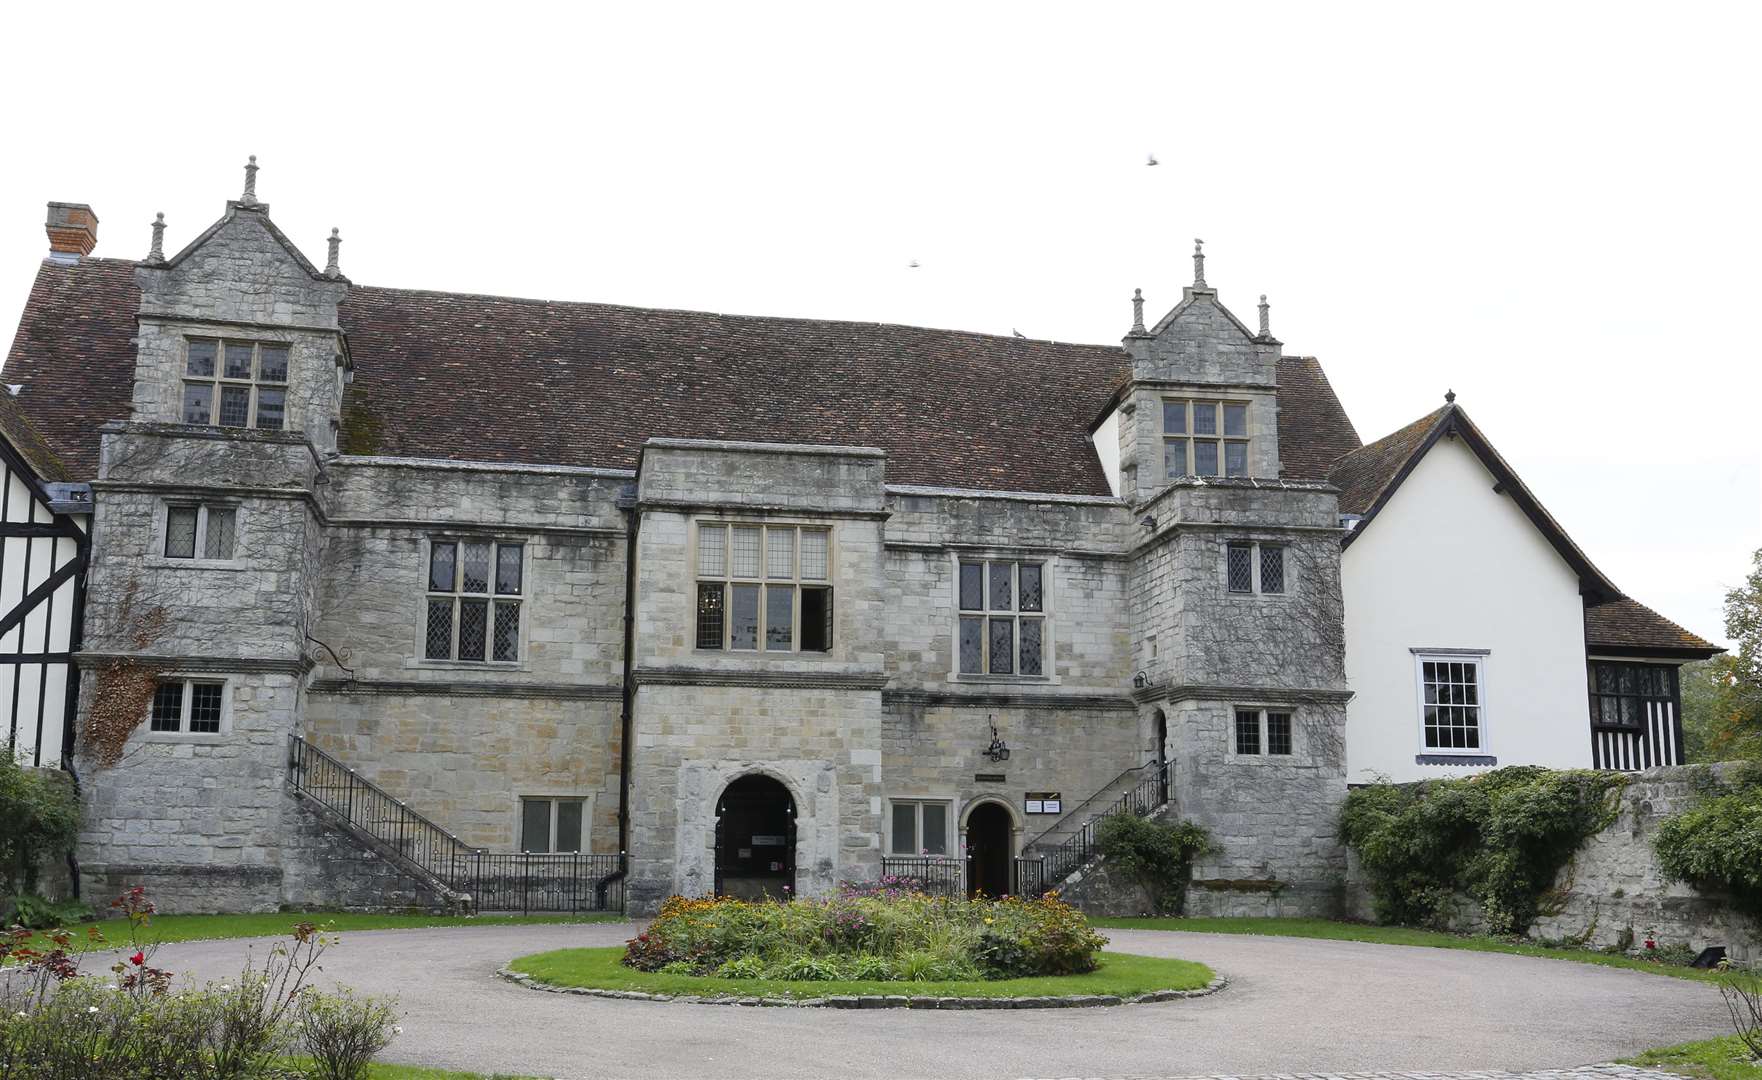 An inquest was held into the death of Nathan Smith at The Archbishop's Palace, in Maidstone